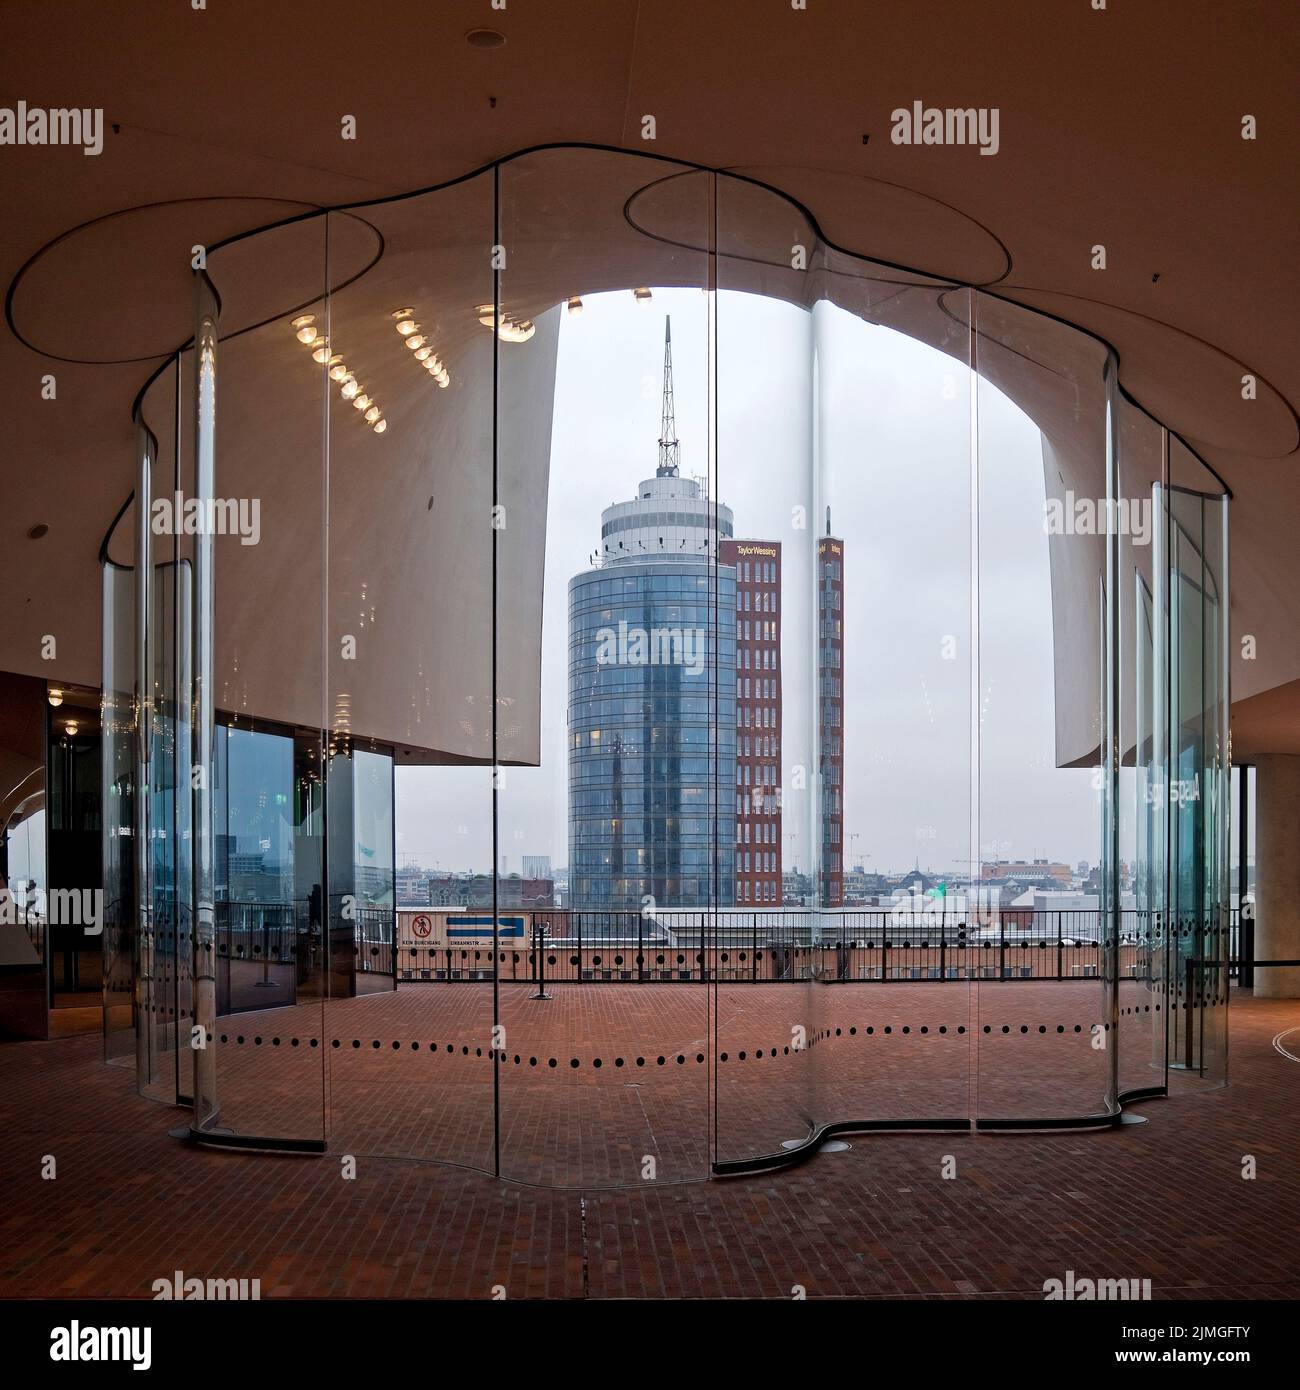 Plaza with curved glass wind deflectors and view to Columbus Haus, Elbphilharmonie, Hamburg, Germany Stock Photo